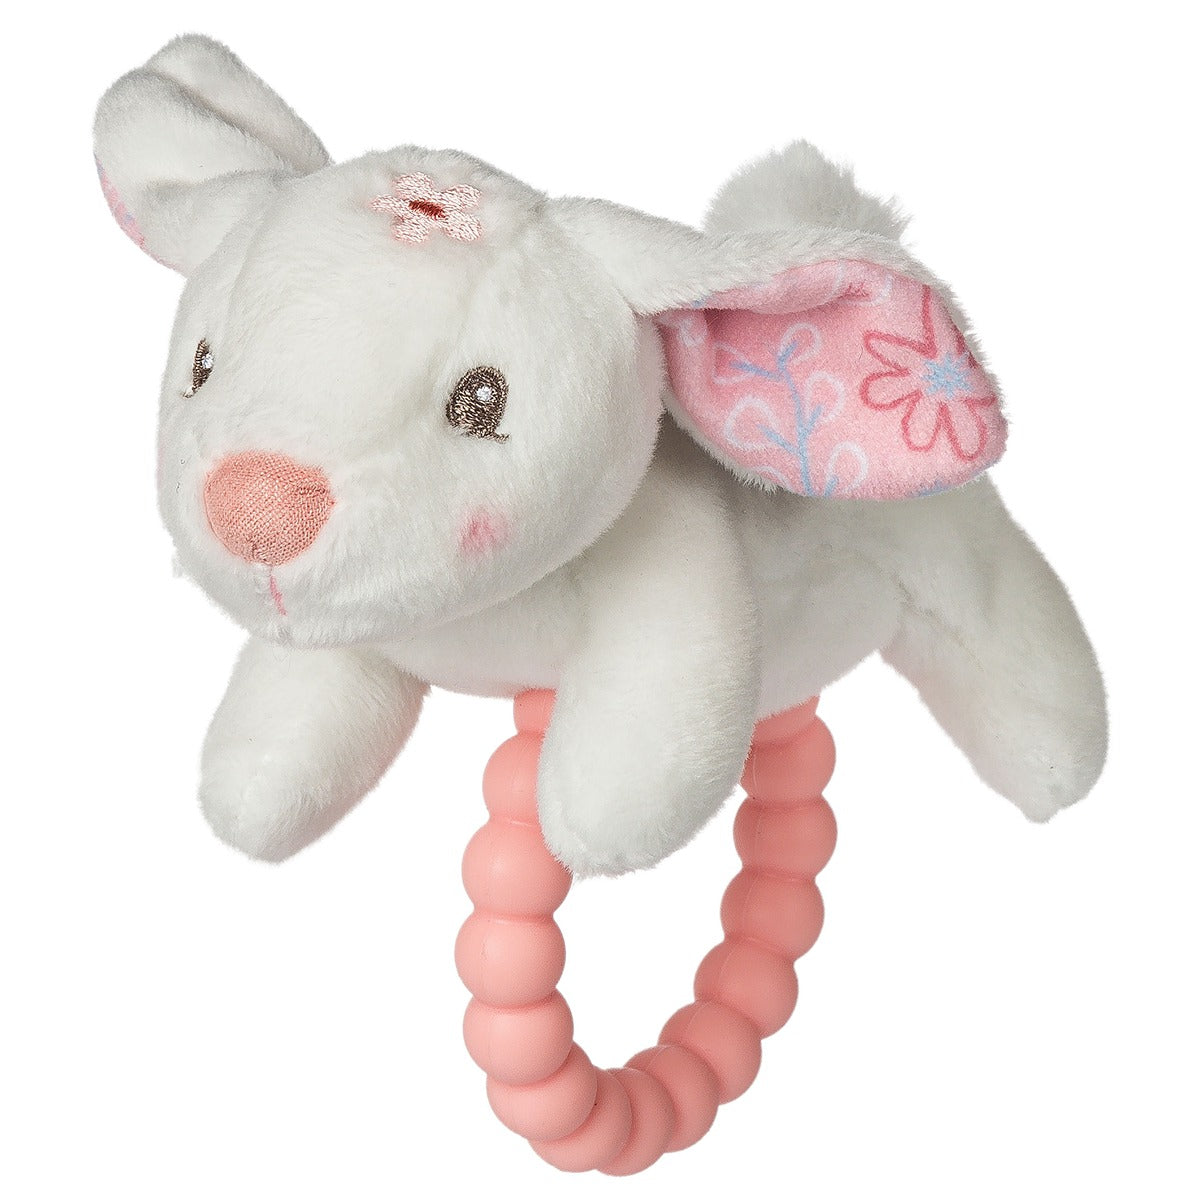 White bunny soft toy rattle with pink silicone teether